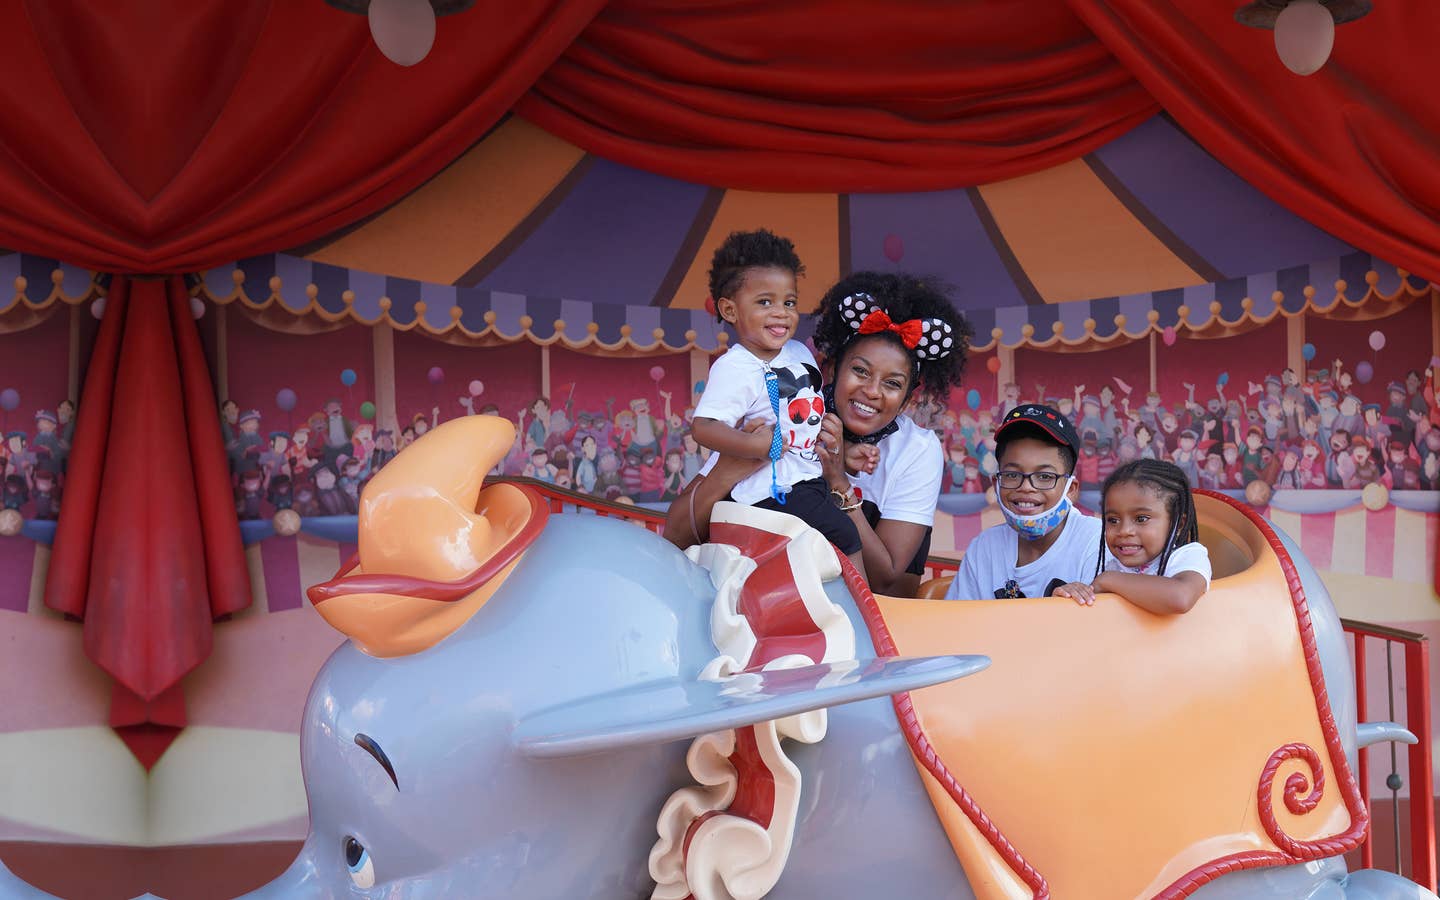 Featured Contributor, Tina Meeks, poses with her daughter and sons on a Dumbo ride vehicle located in Magic Kingdom at Walt Disney World resort.